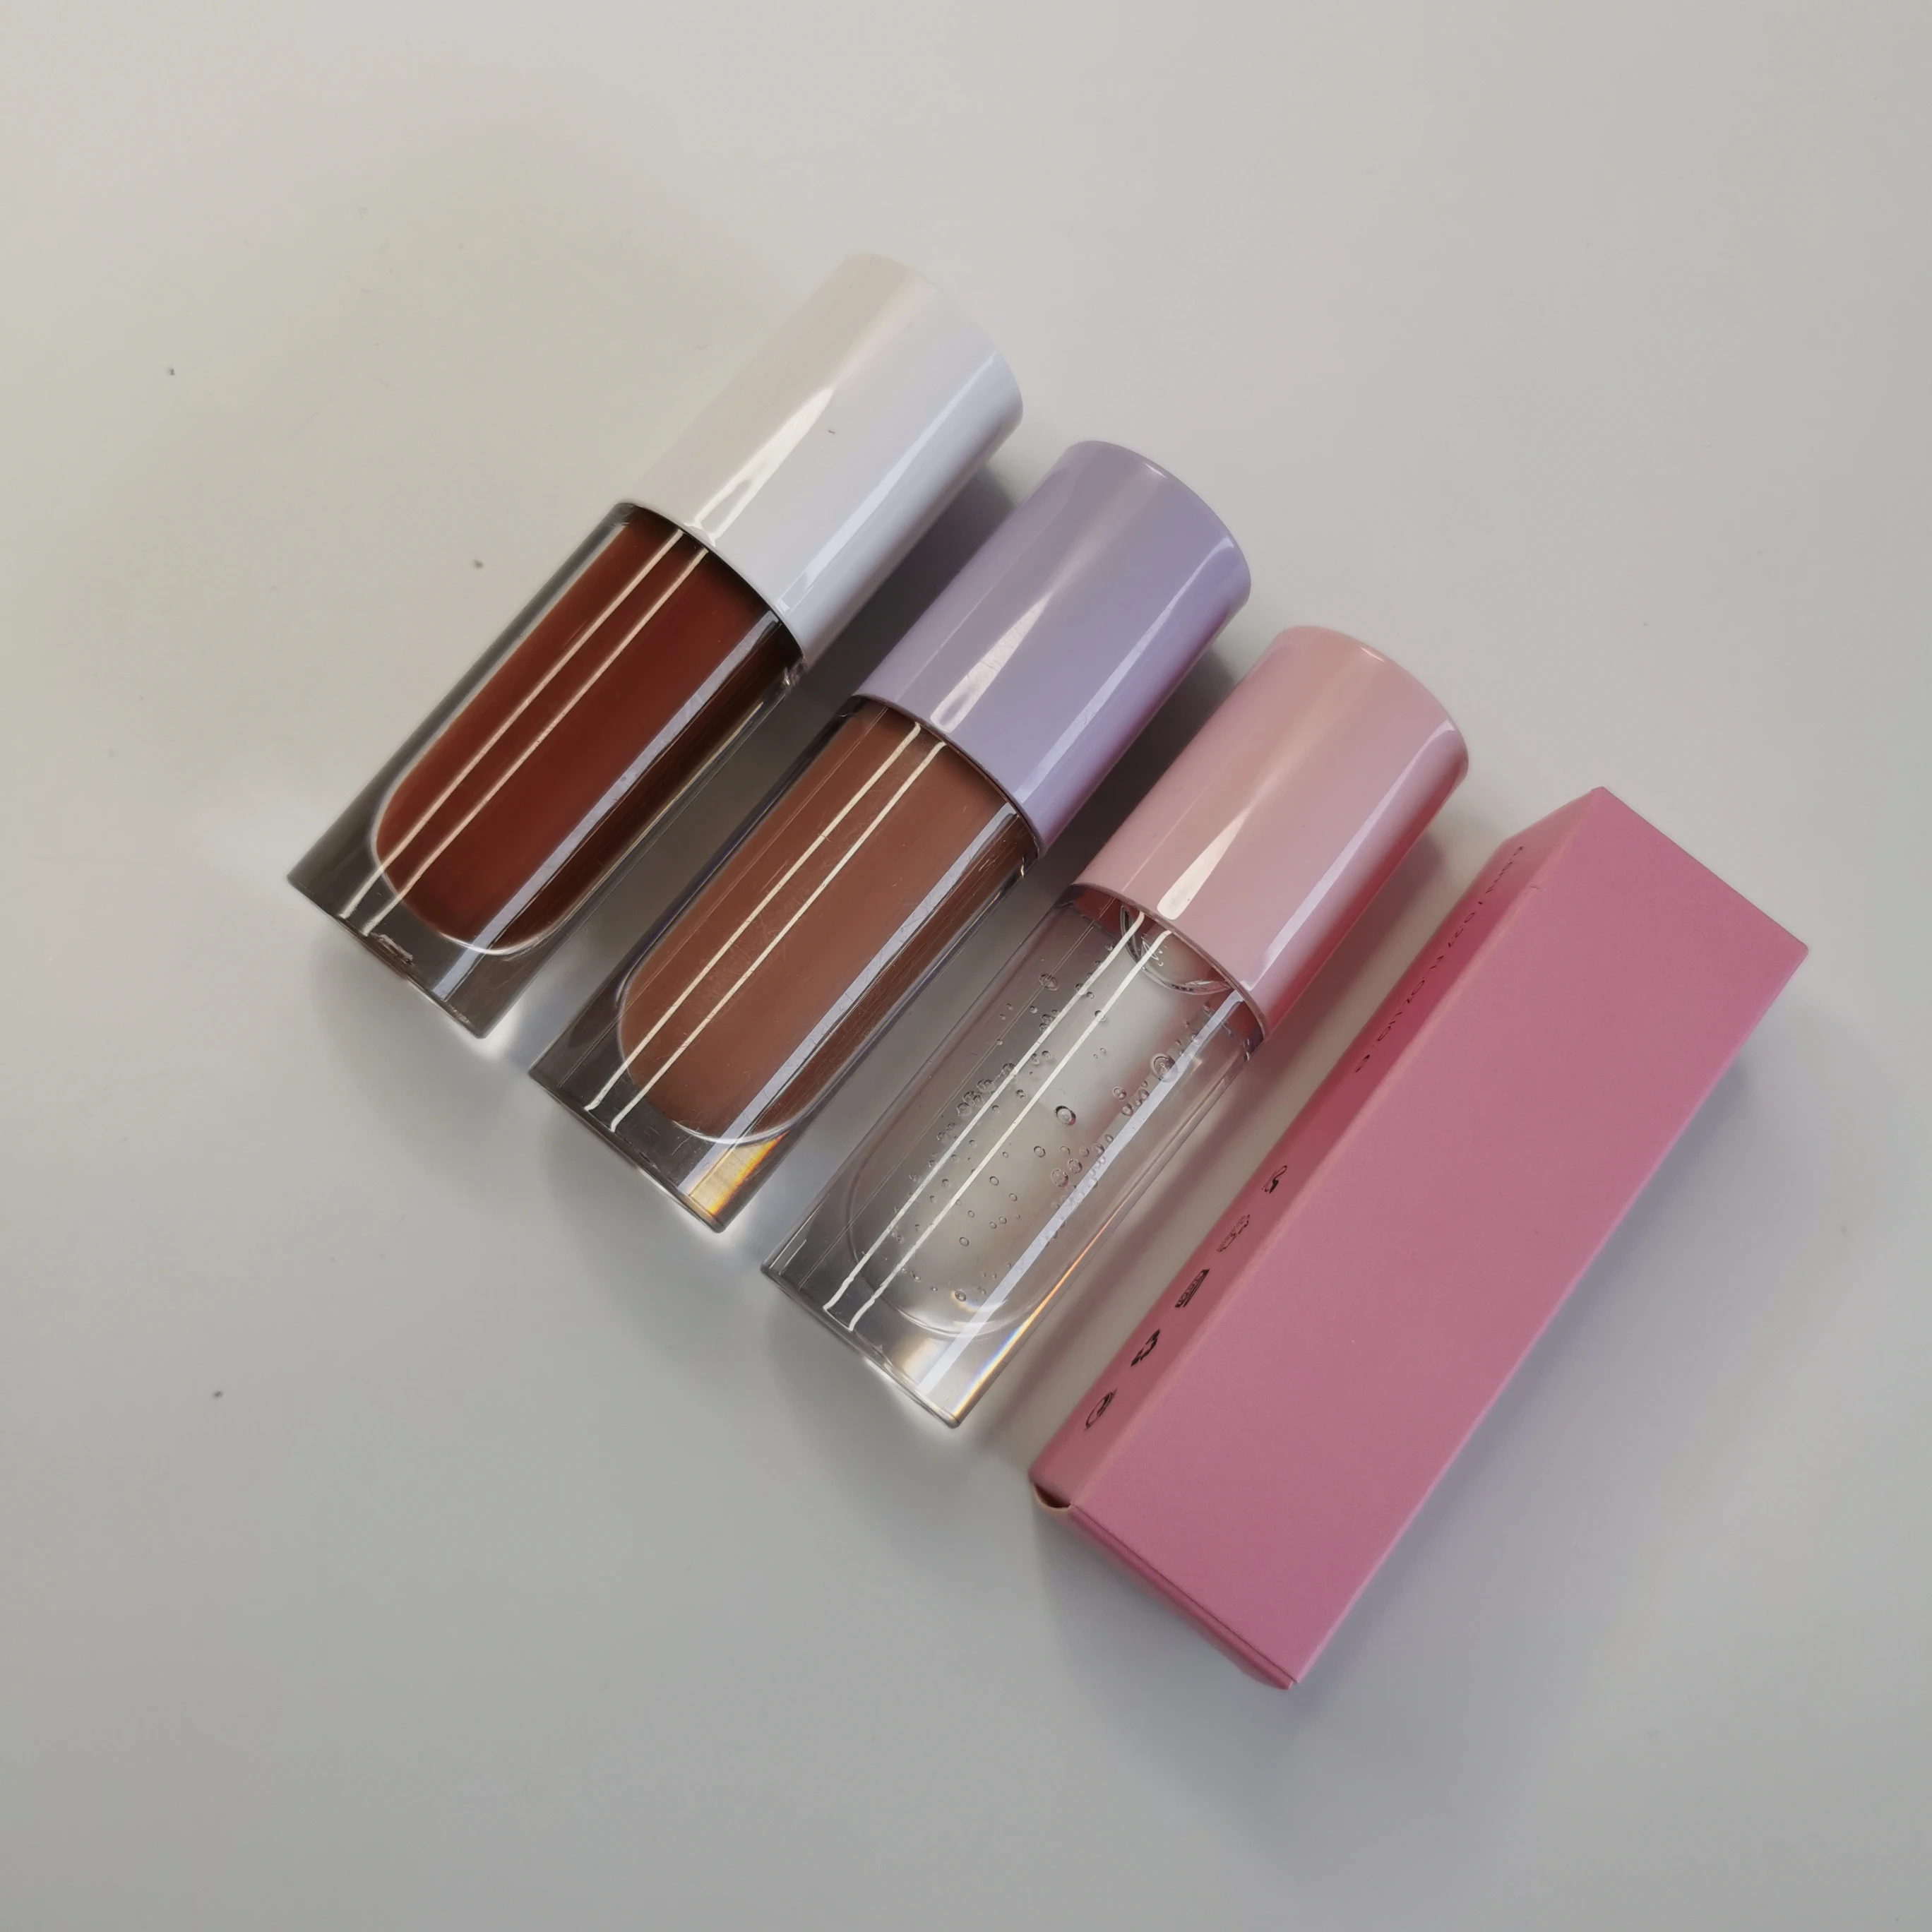 Customized lip gloss tubes packaging box 30 color nude clear shiny lip gloss private label